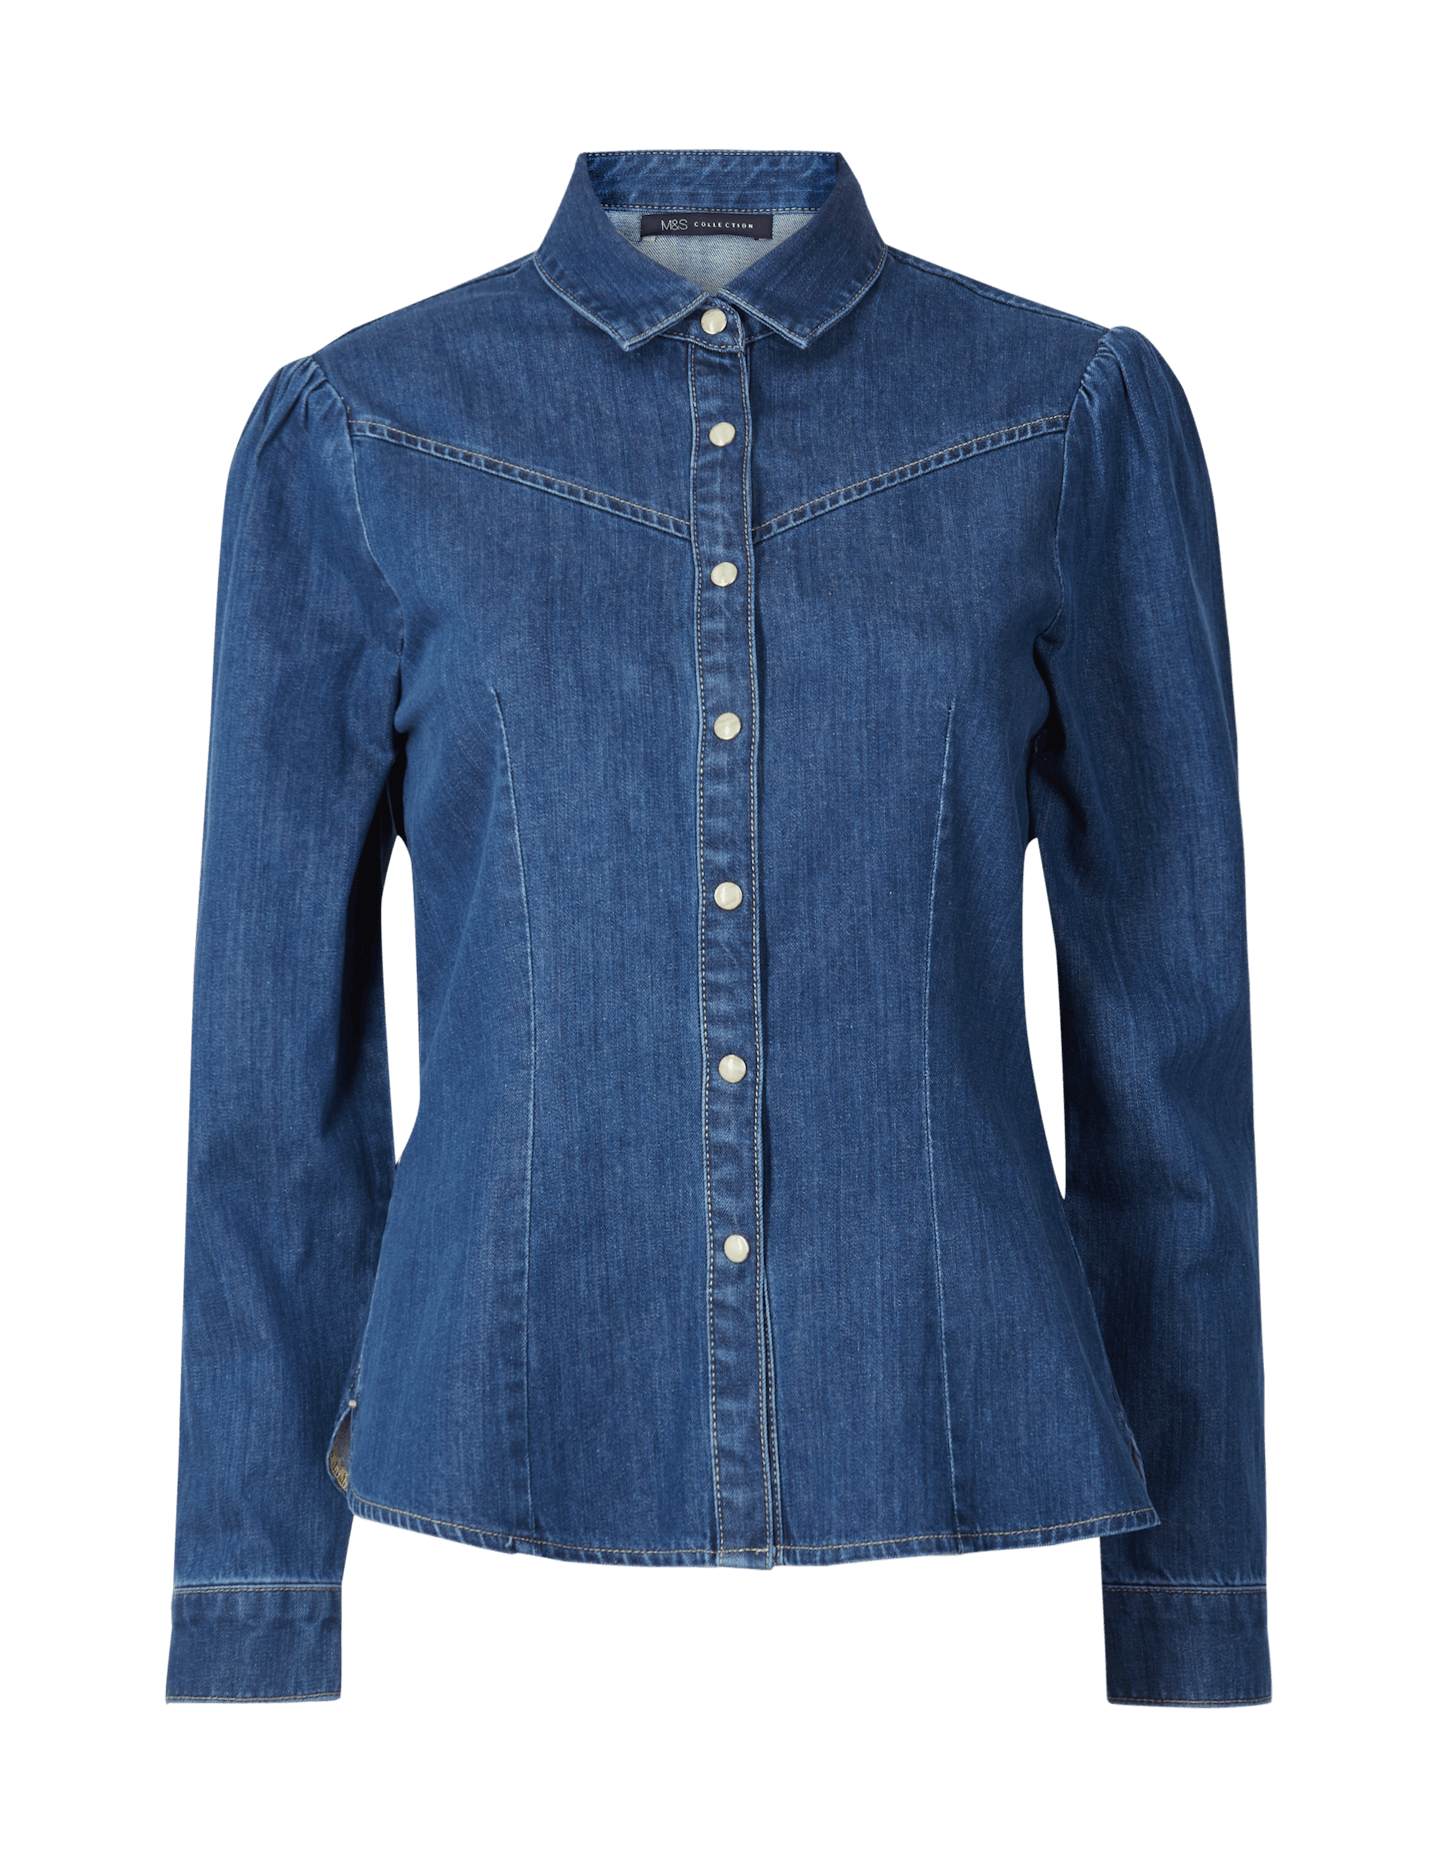 Holly Willoughby M&S Western denim shirt, 32.50